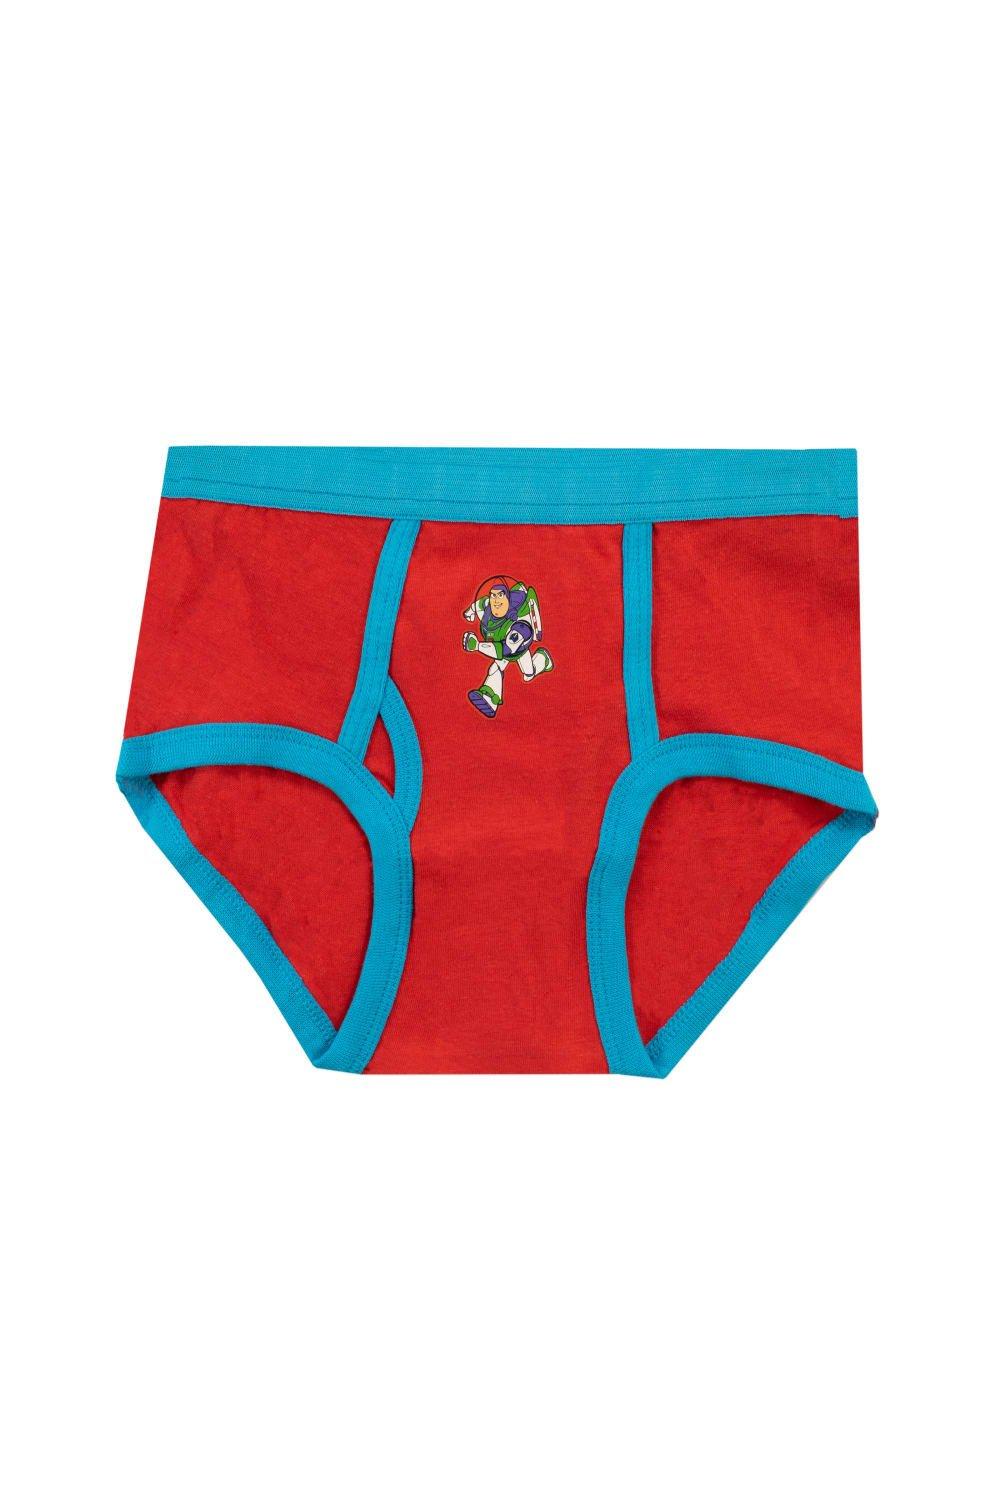 Matalan Boys 5 pack Briefs with Animals age 8-9 years or Cars age 6-7 years.